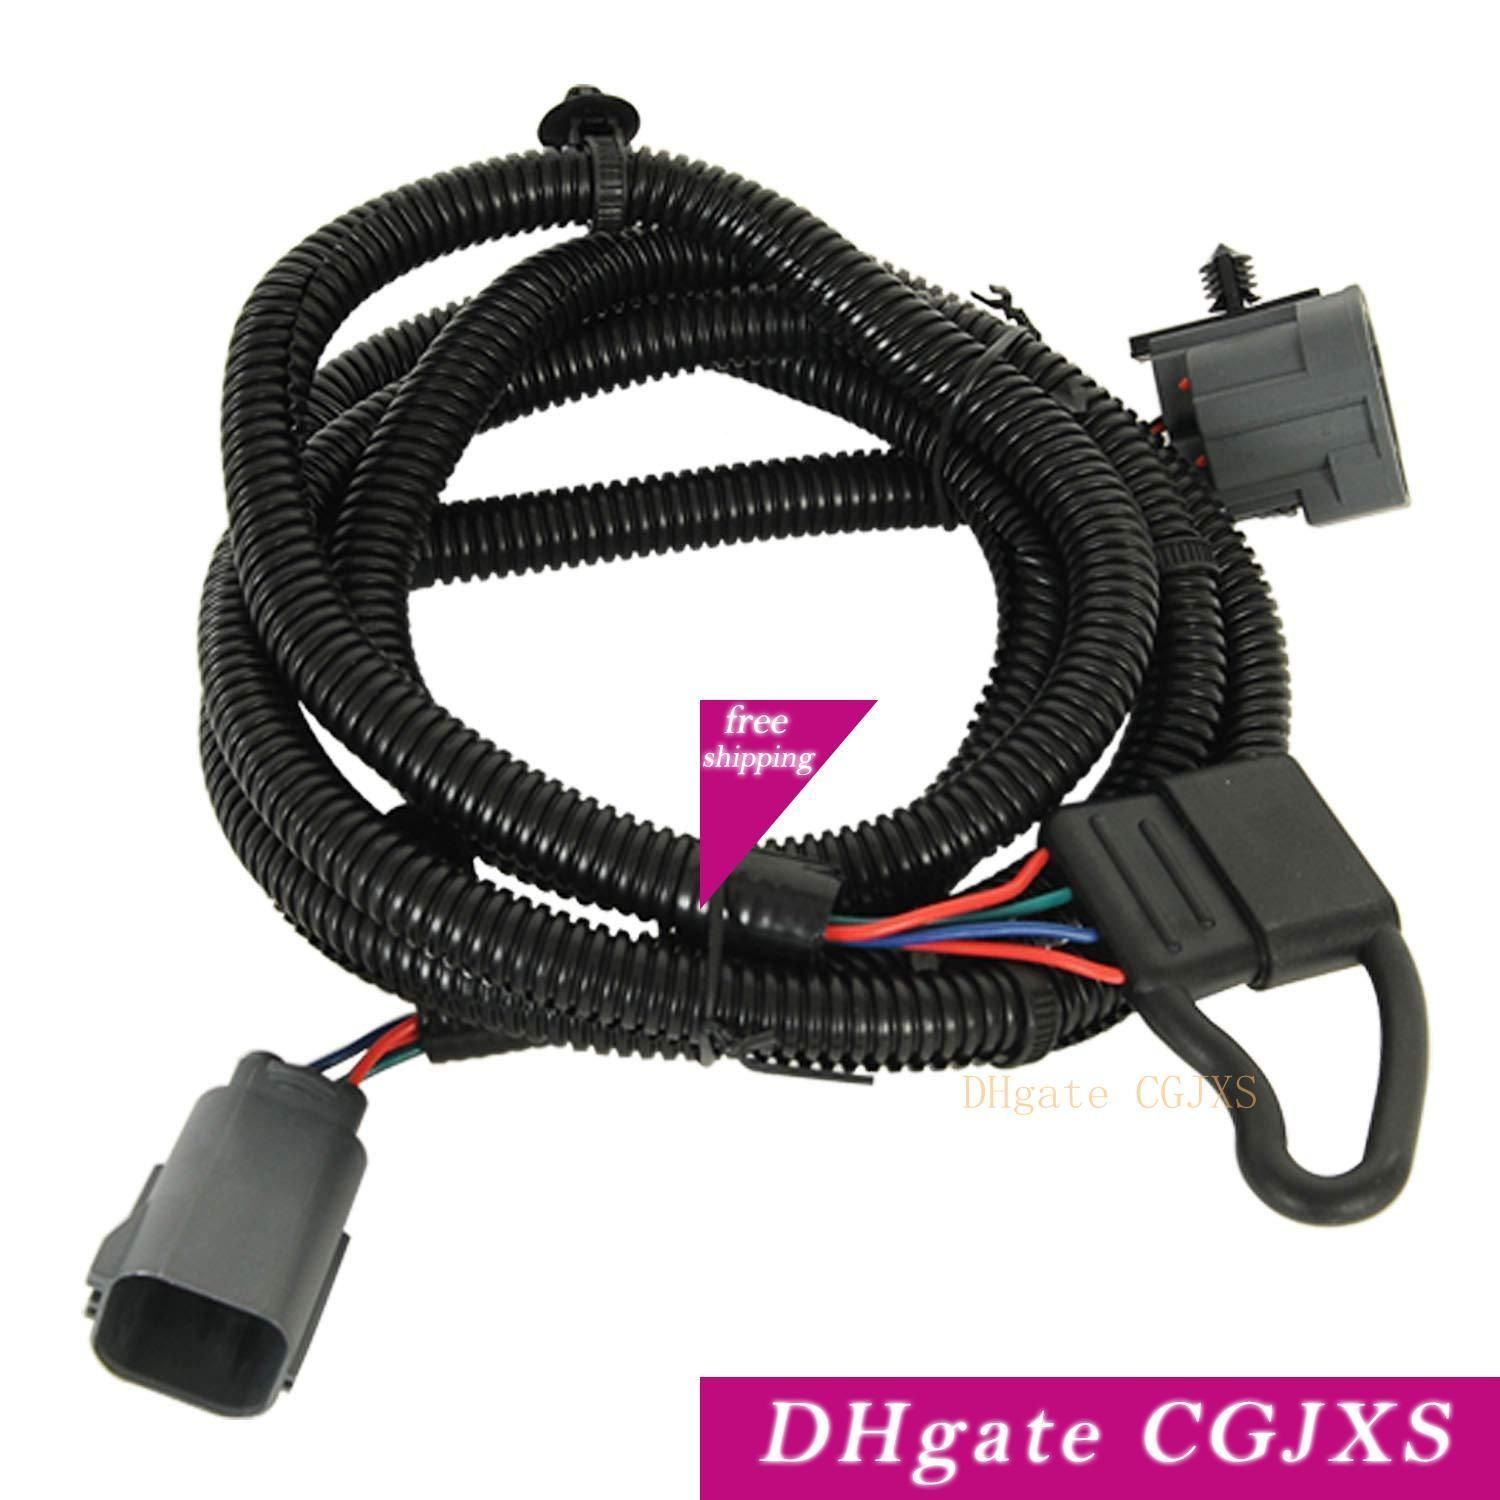 Trailer Hitch Wiring Kit For Mercedes Benz from www.dhresource.com